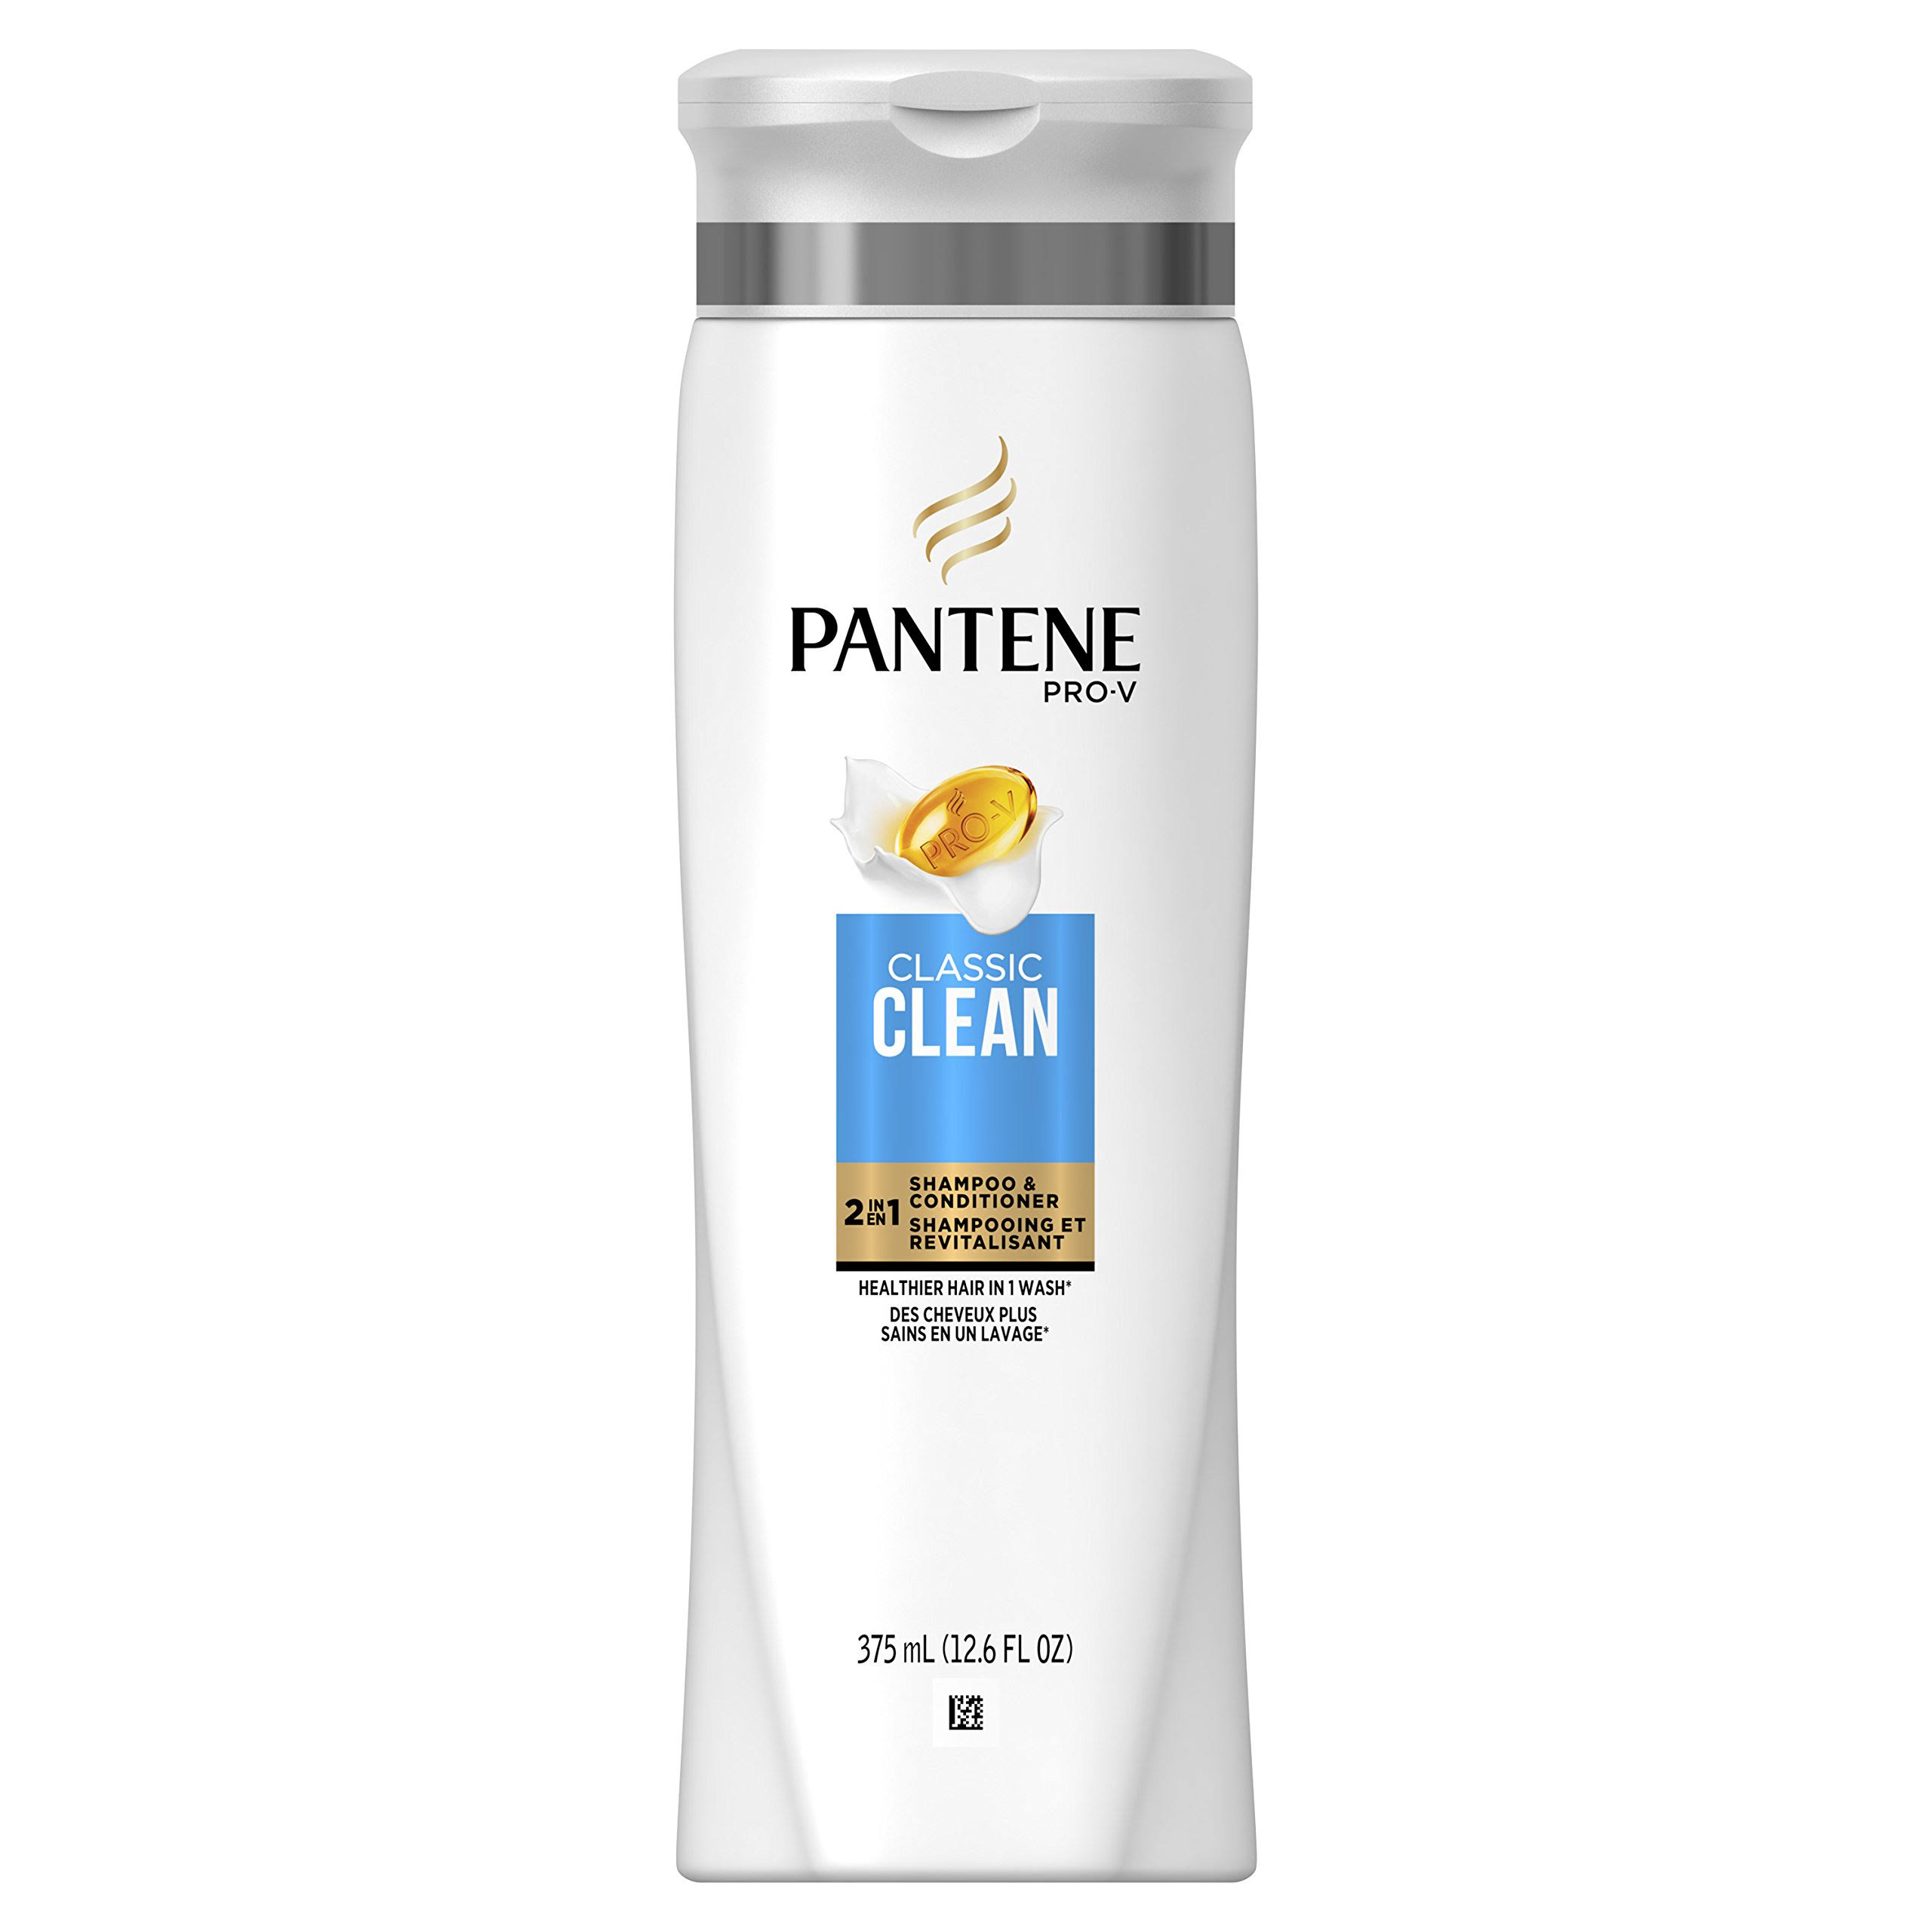 Pantene Classic Clean 2 in 1 Shampoo and Conditioner - 375ml